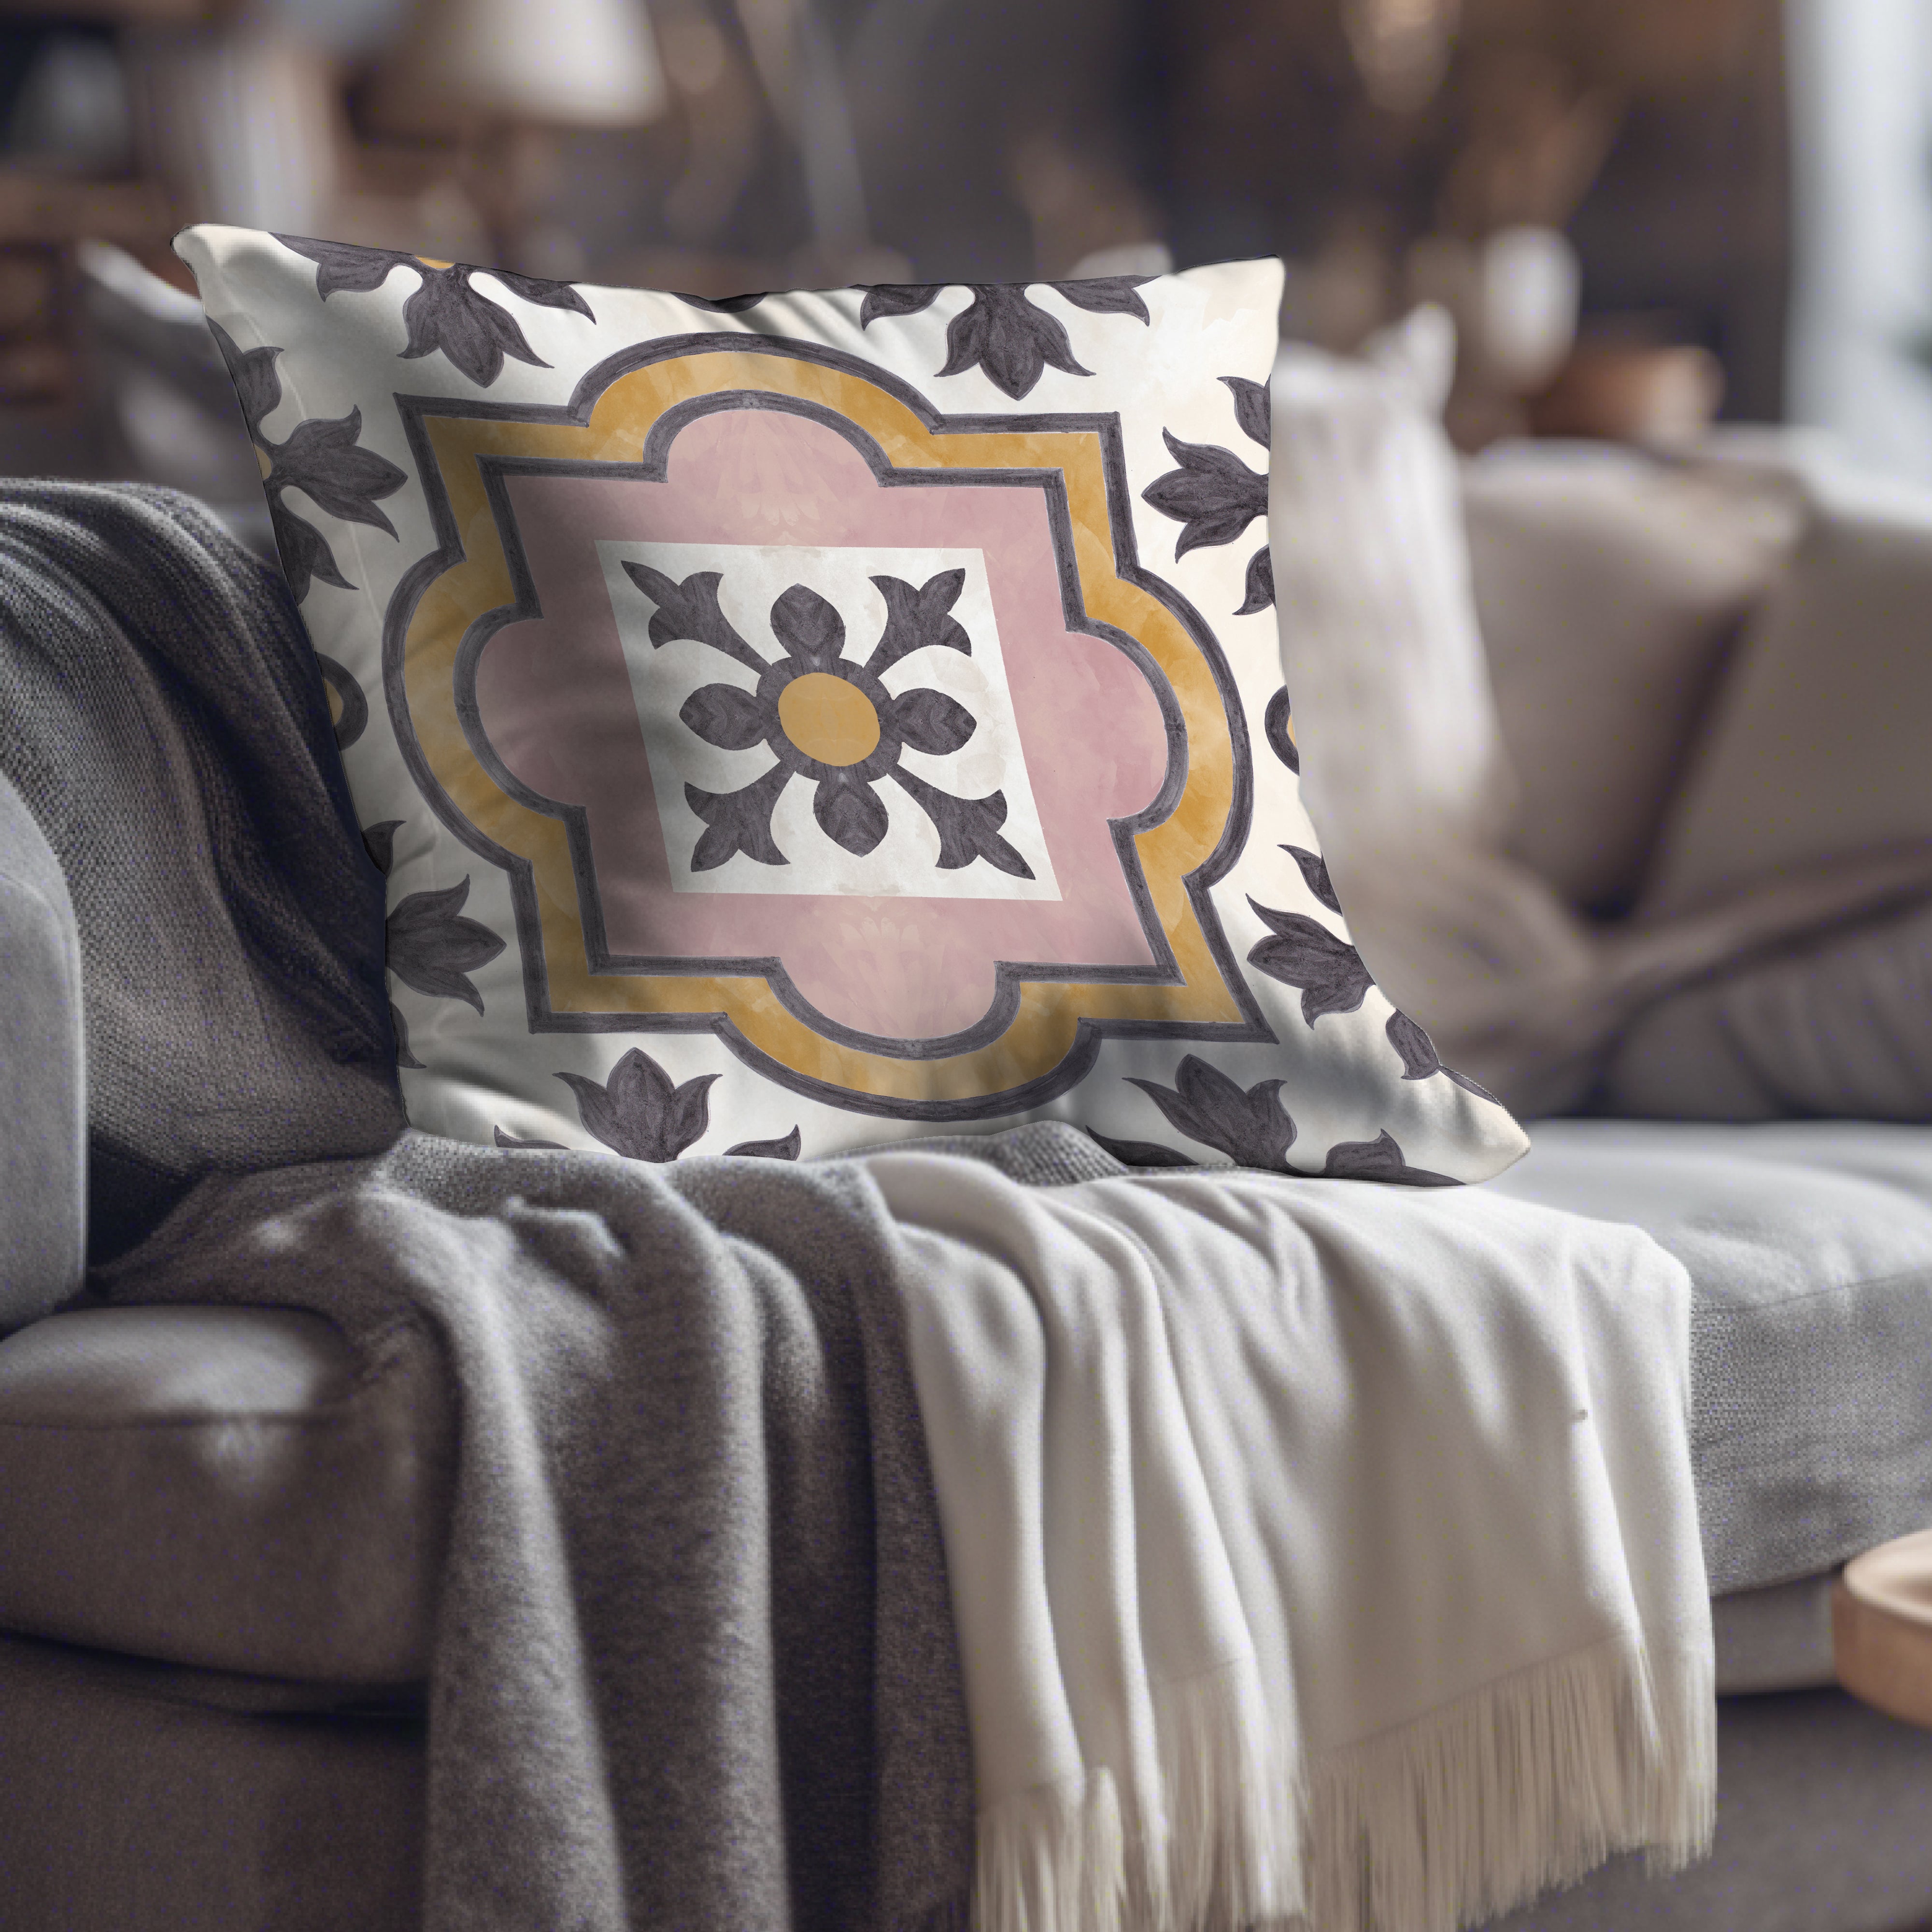 a decorative pillow on a couch in a living room